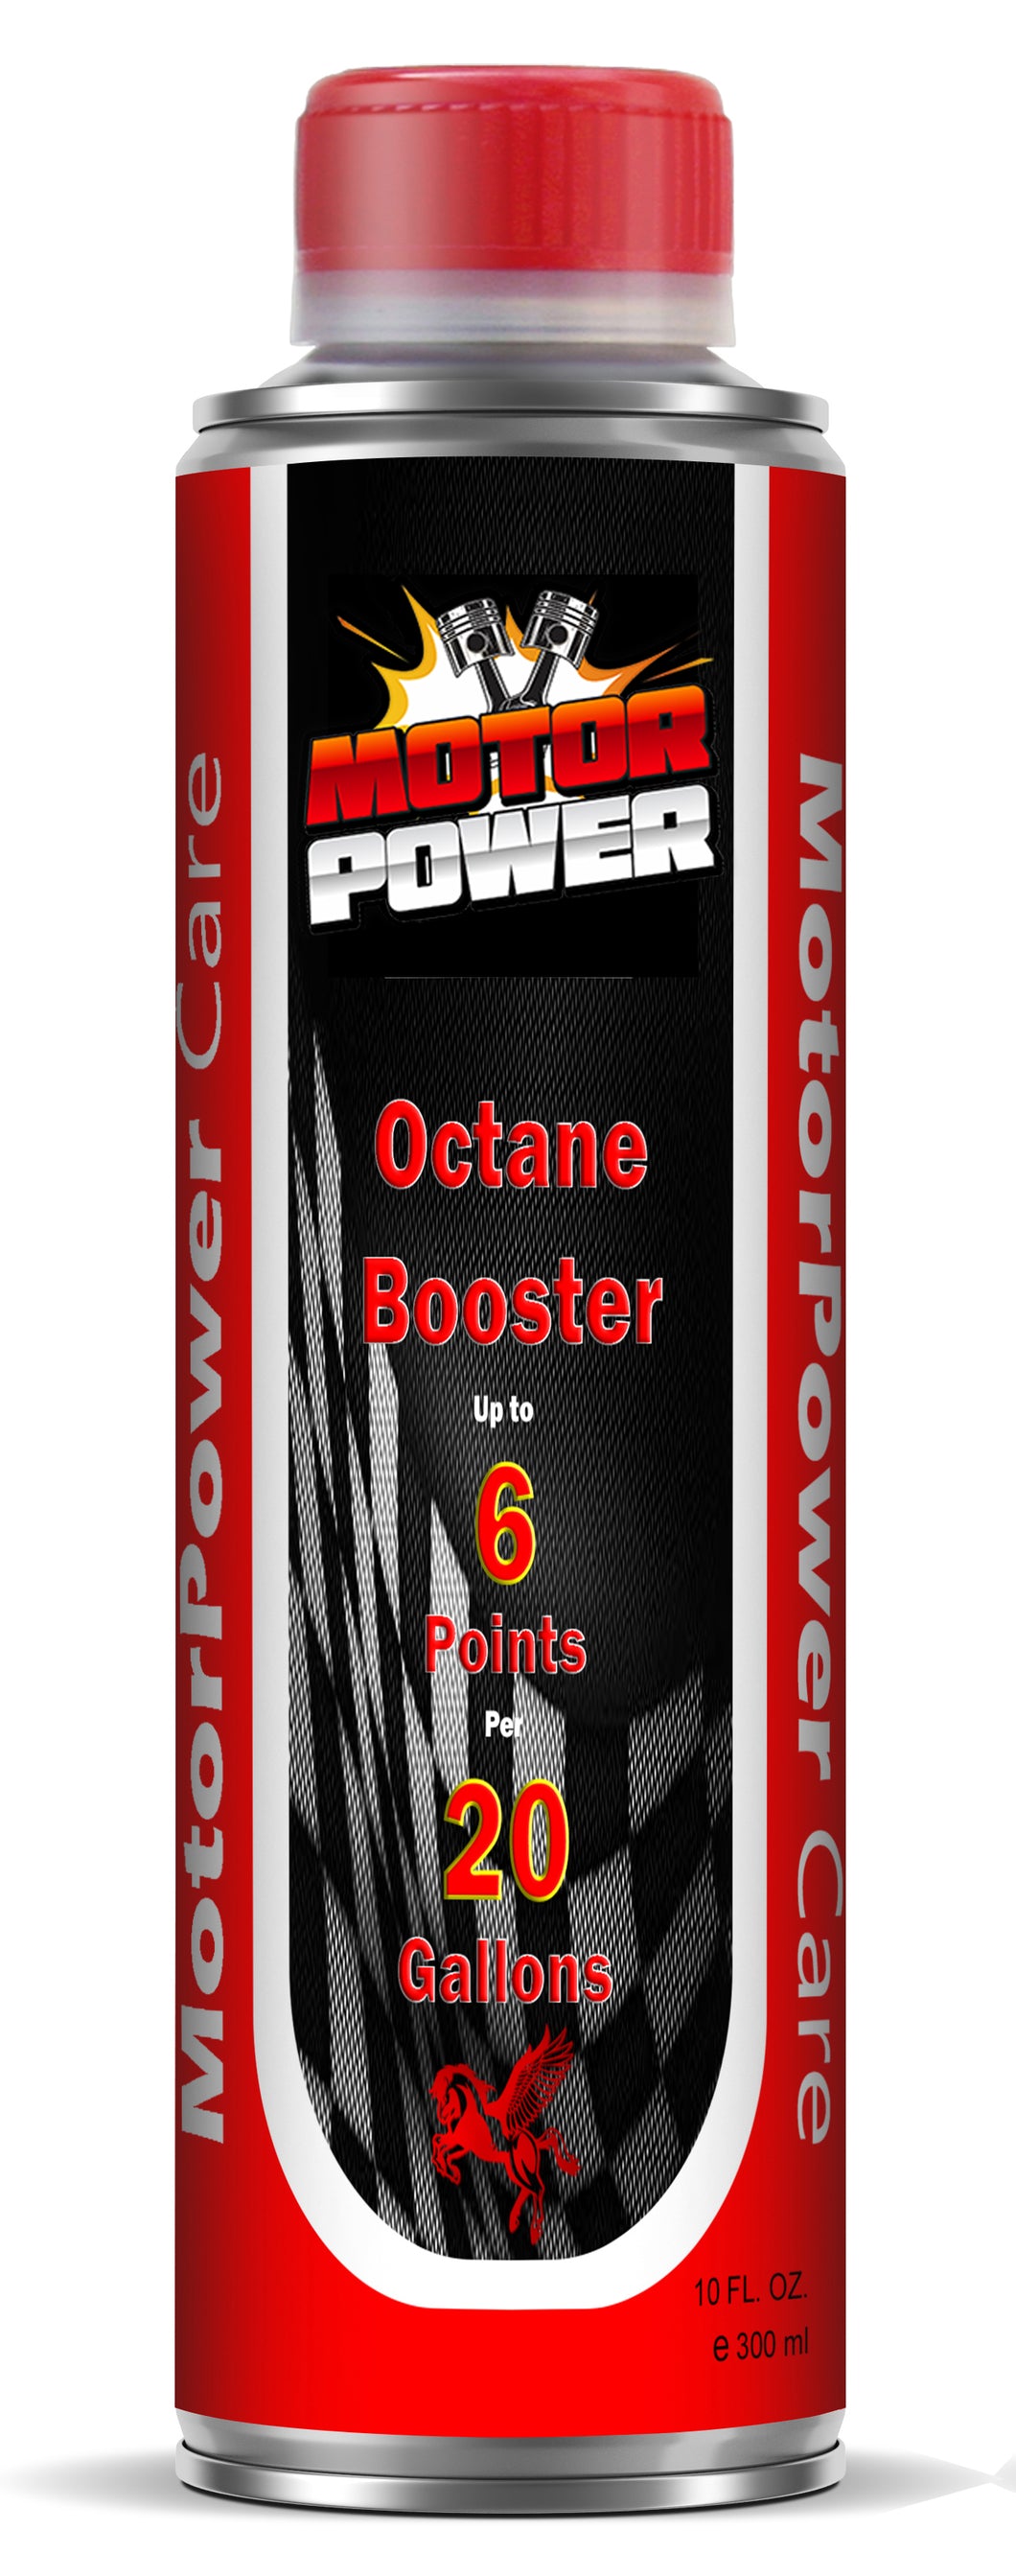 Octane Booster up to 6 points per 20 gallons high quality TUV certified